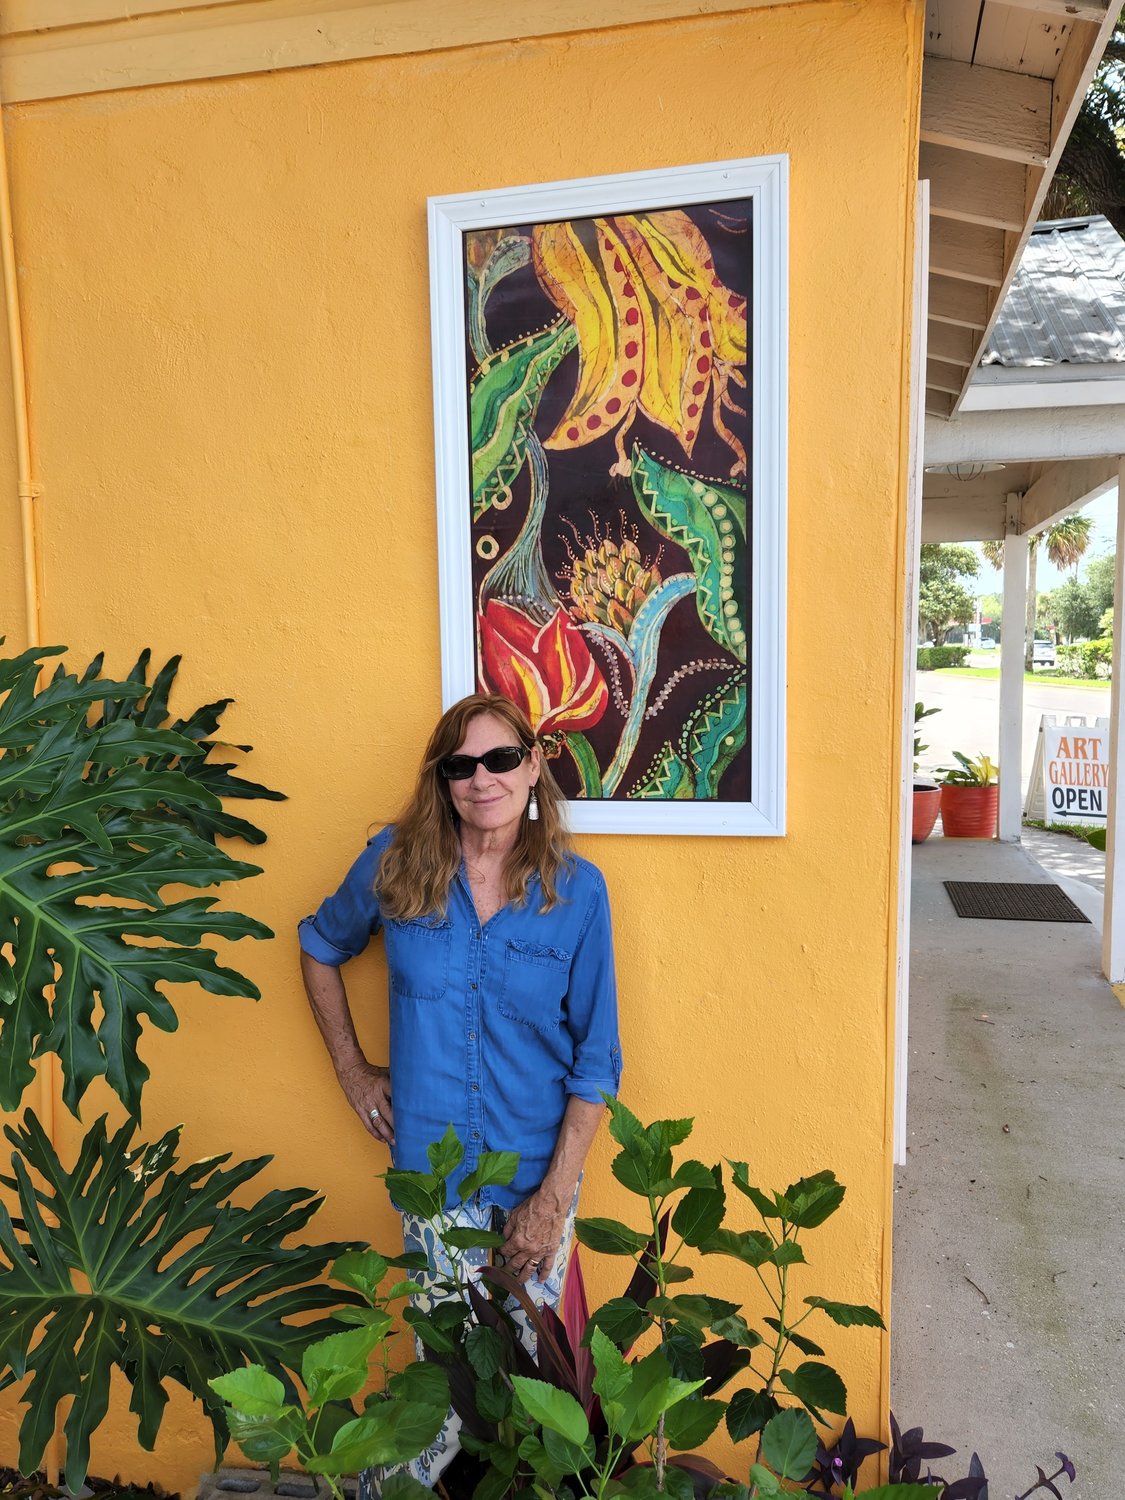 Wendy Tatter stands outside her new art gallery location in St. Augustine.